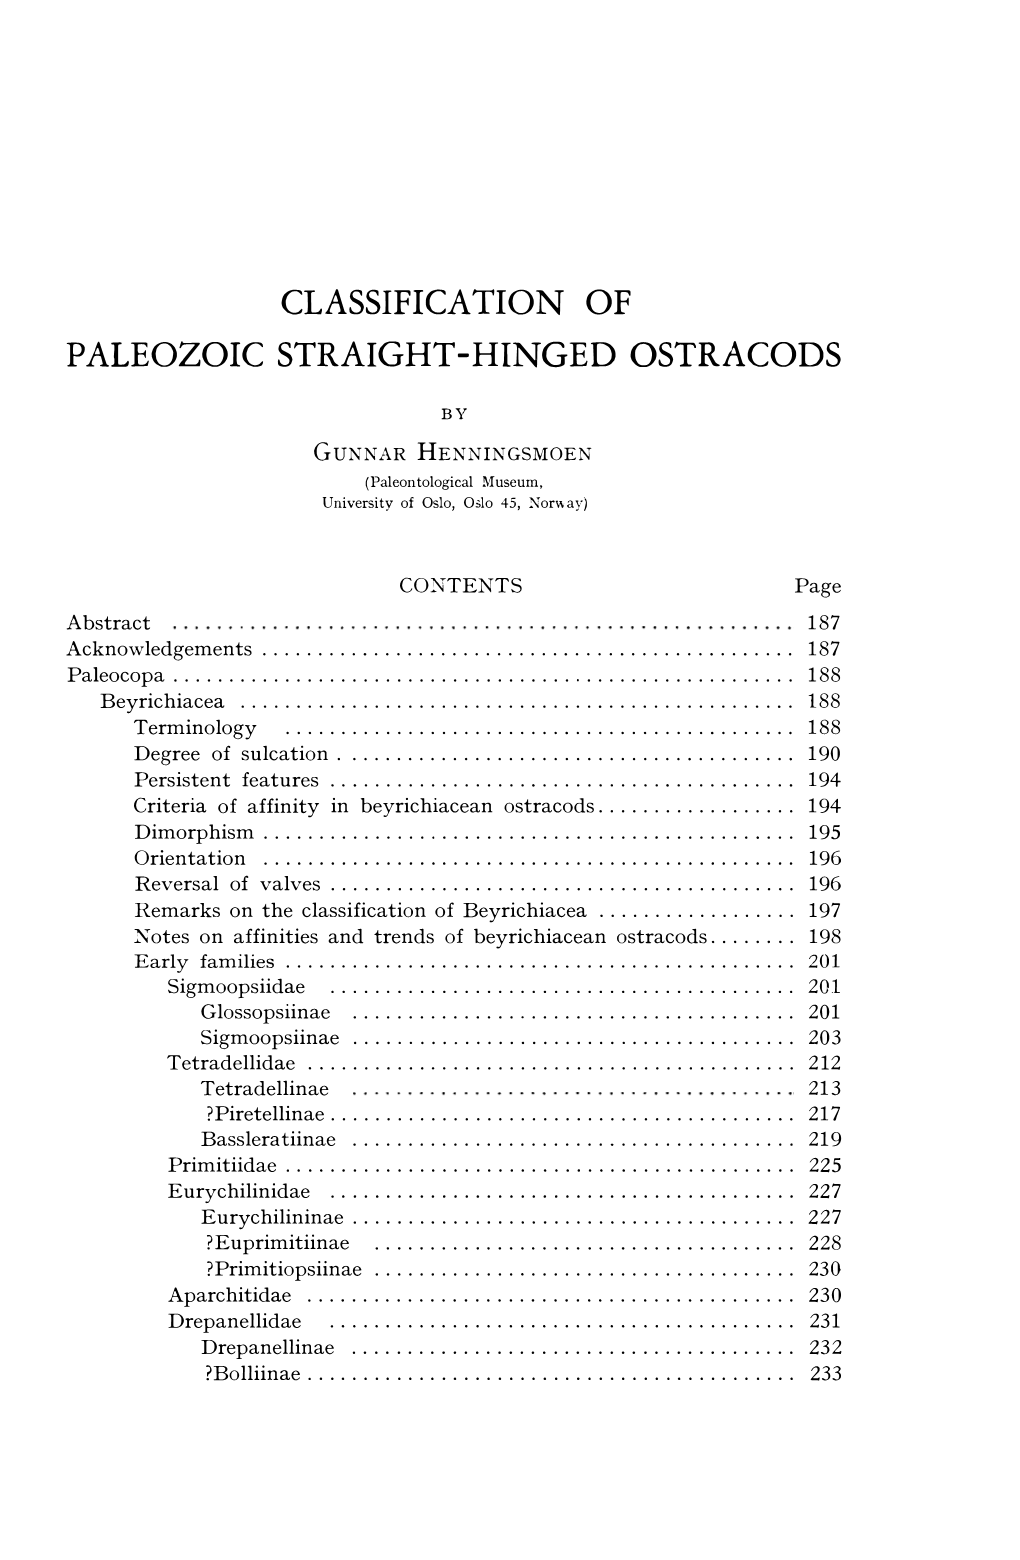 Classification of Paleozoic Straight-Hinged Ostracods (List)